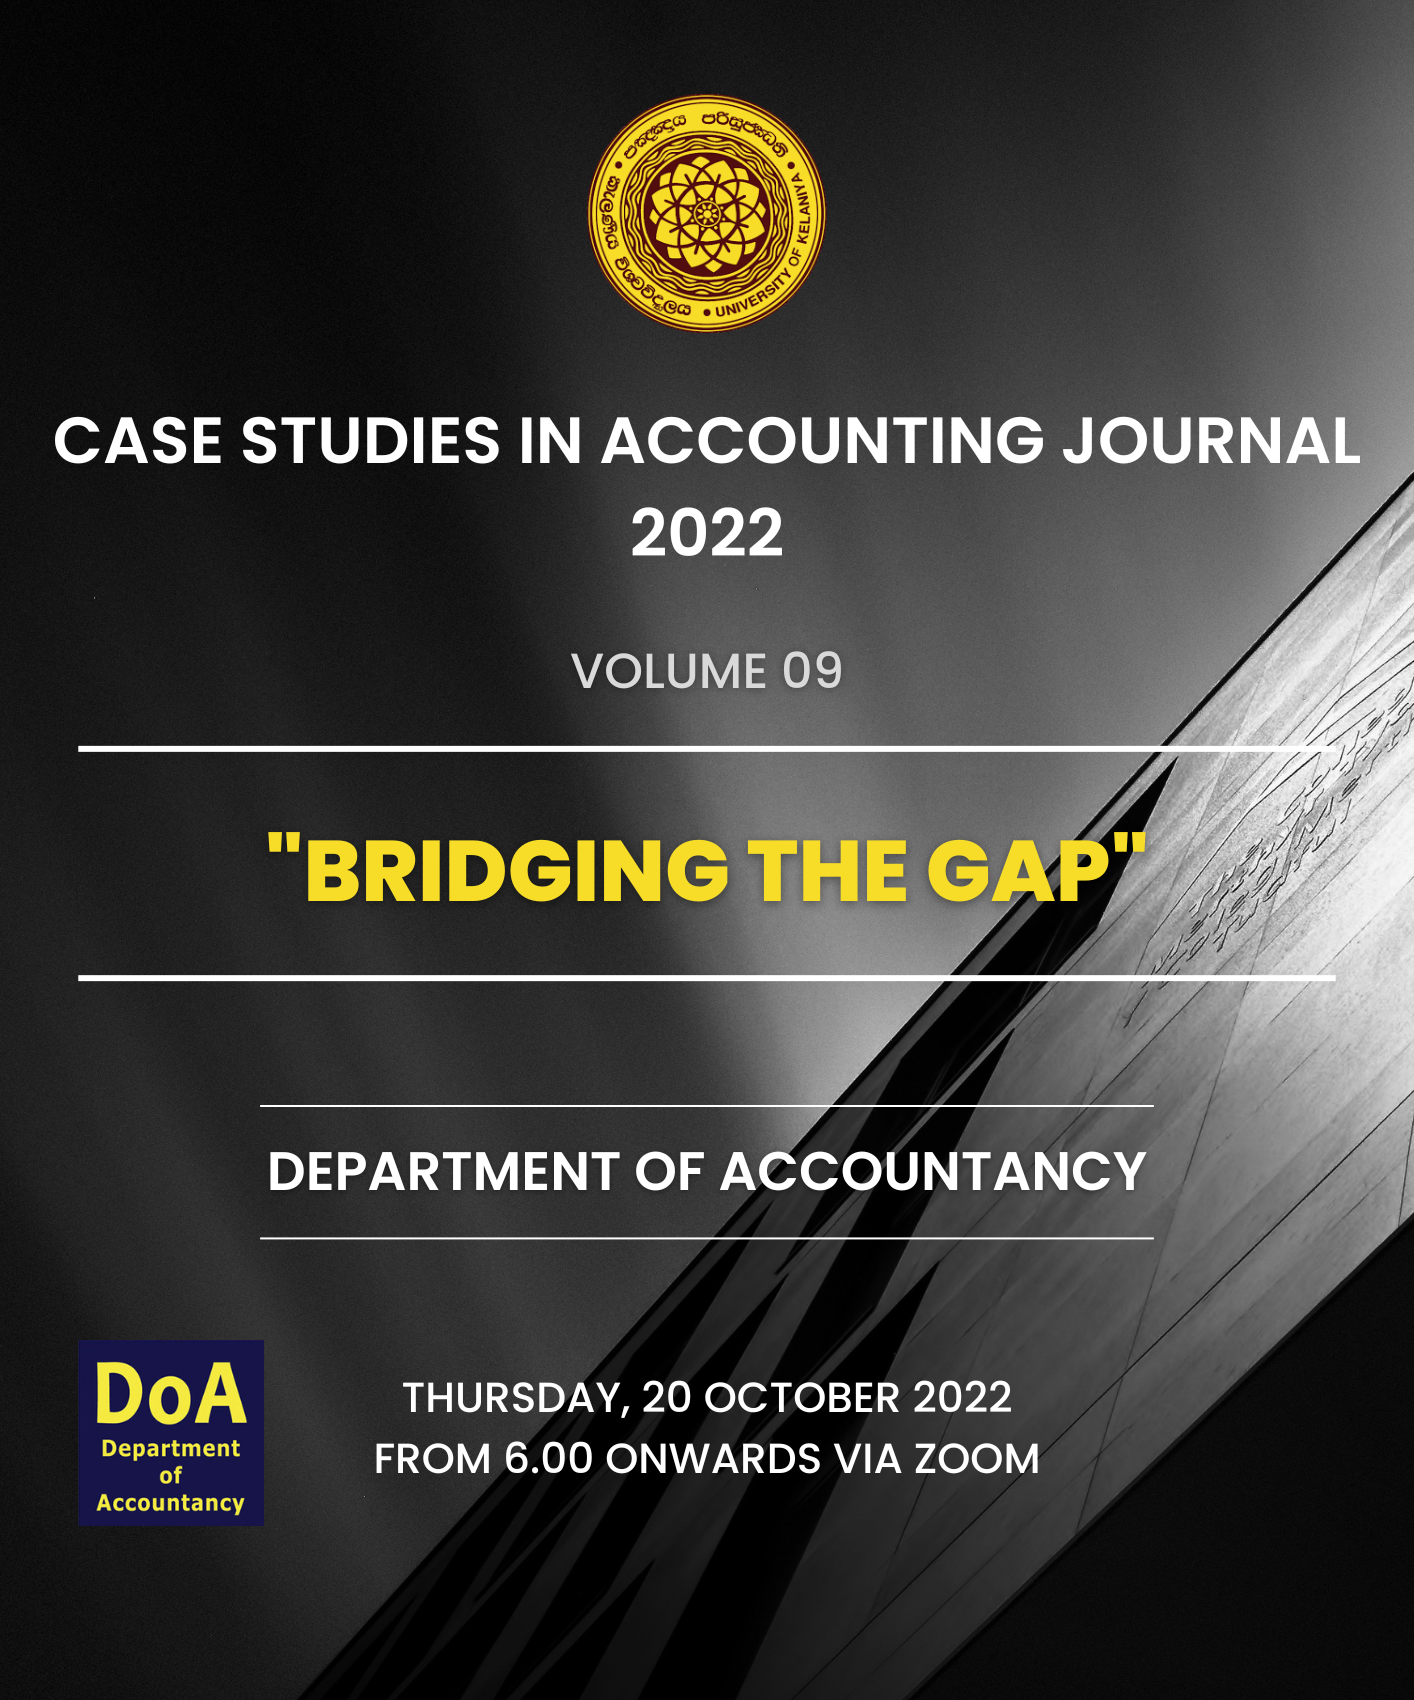 The Launching Ceremony of Case Studies in Accounting Journal 2022 – Volume 09